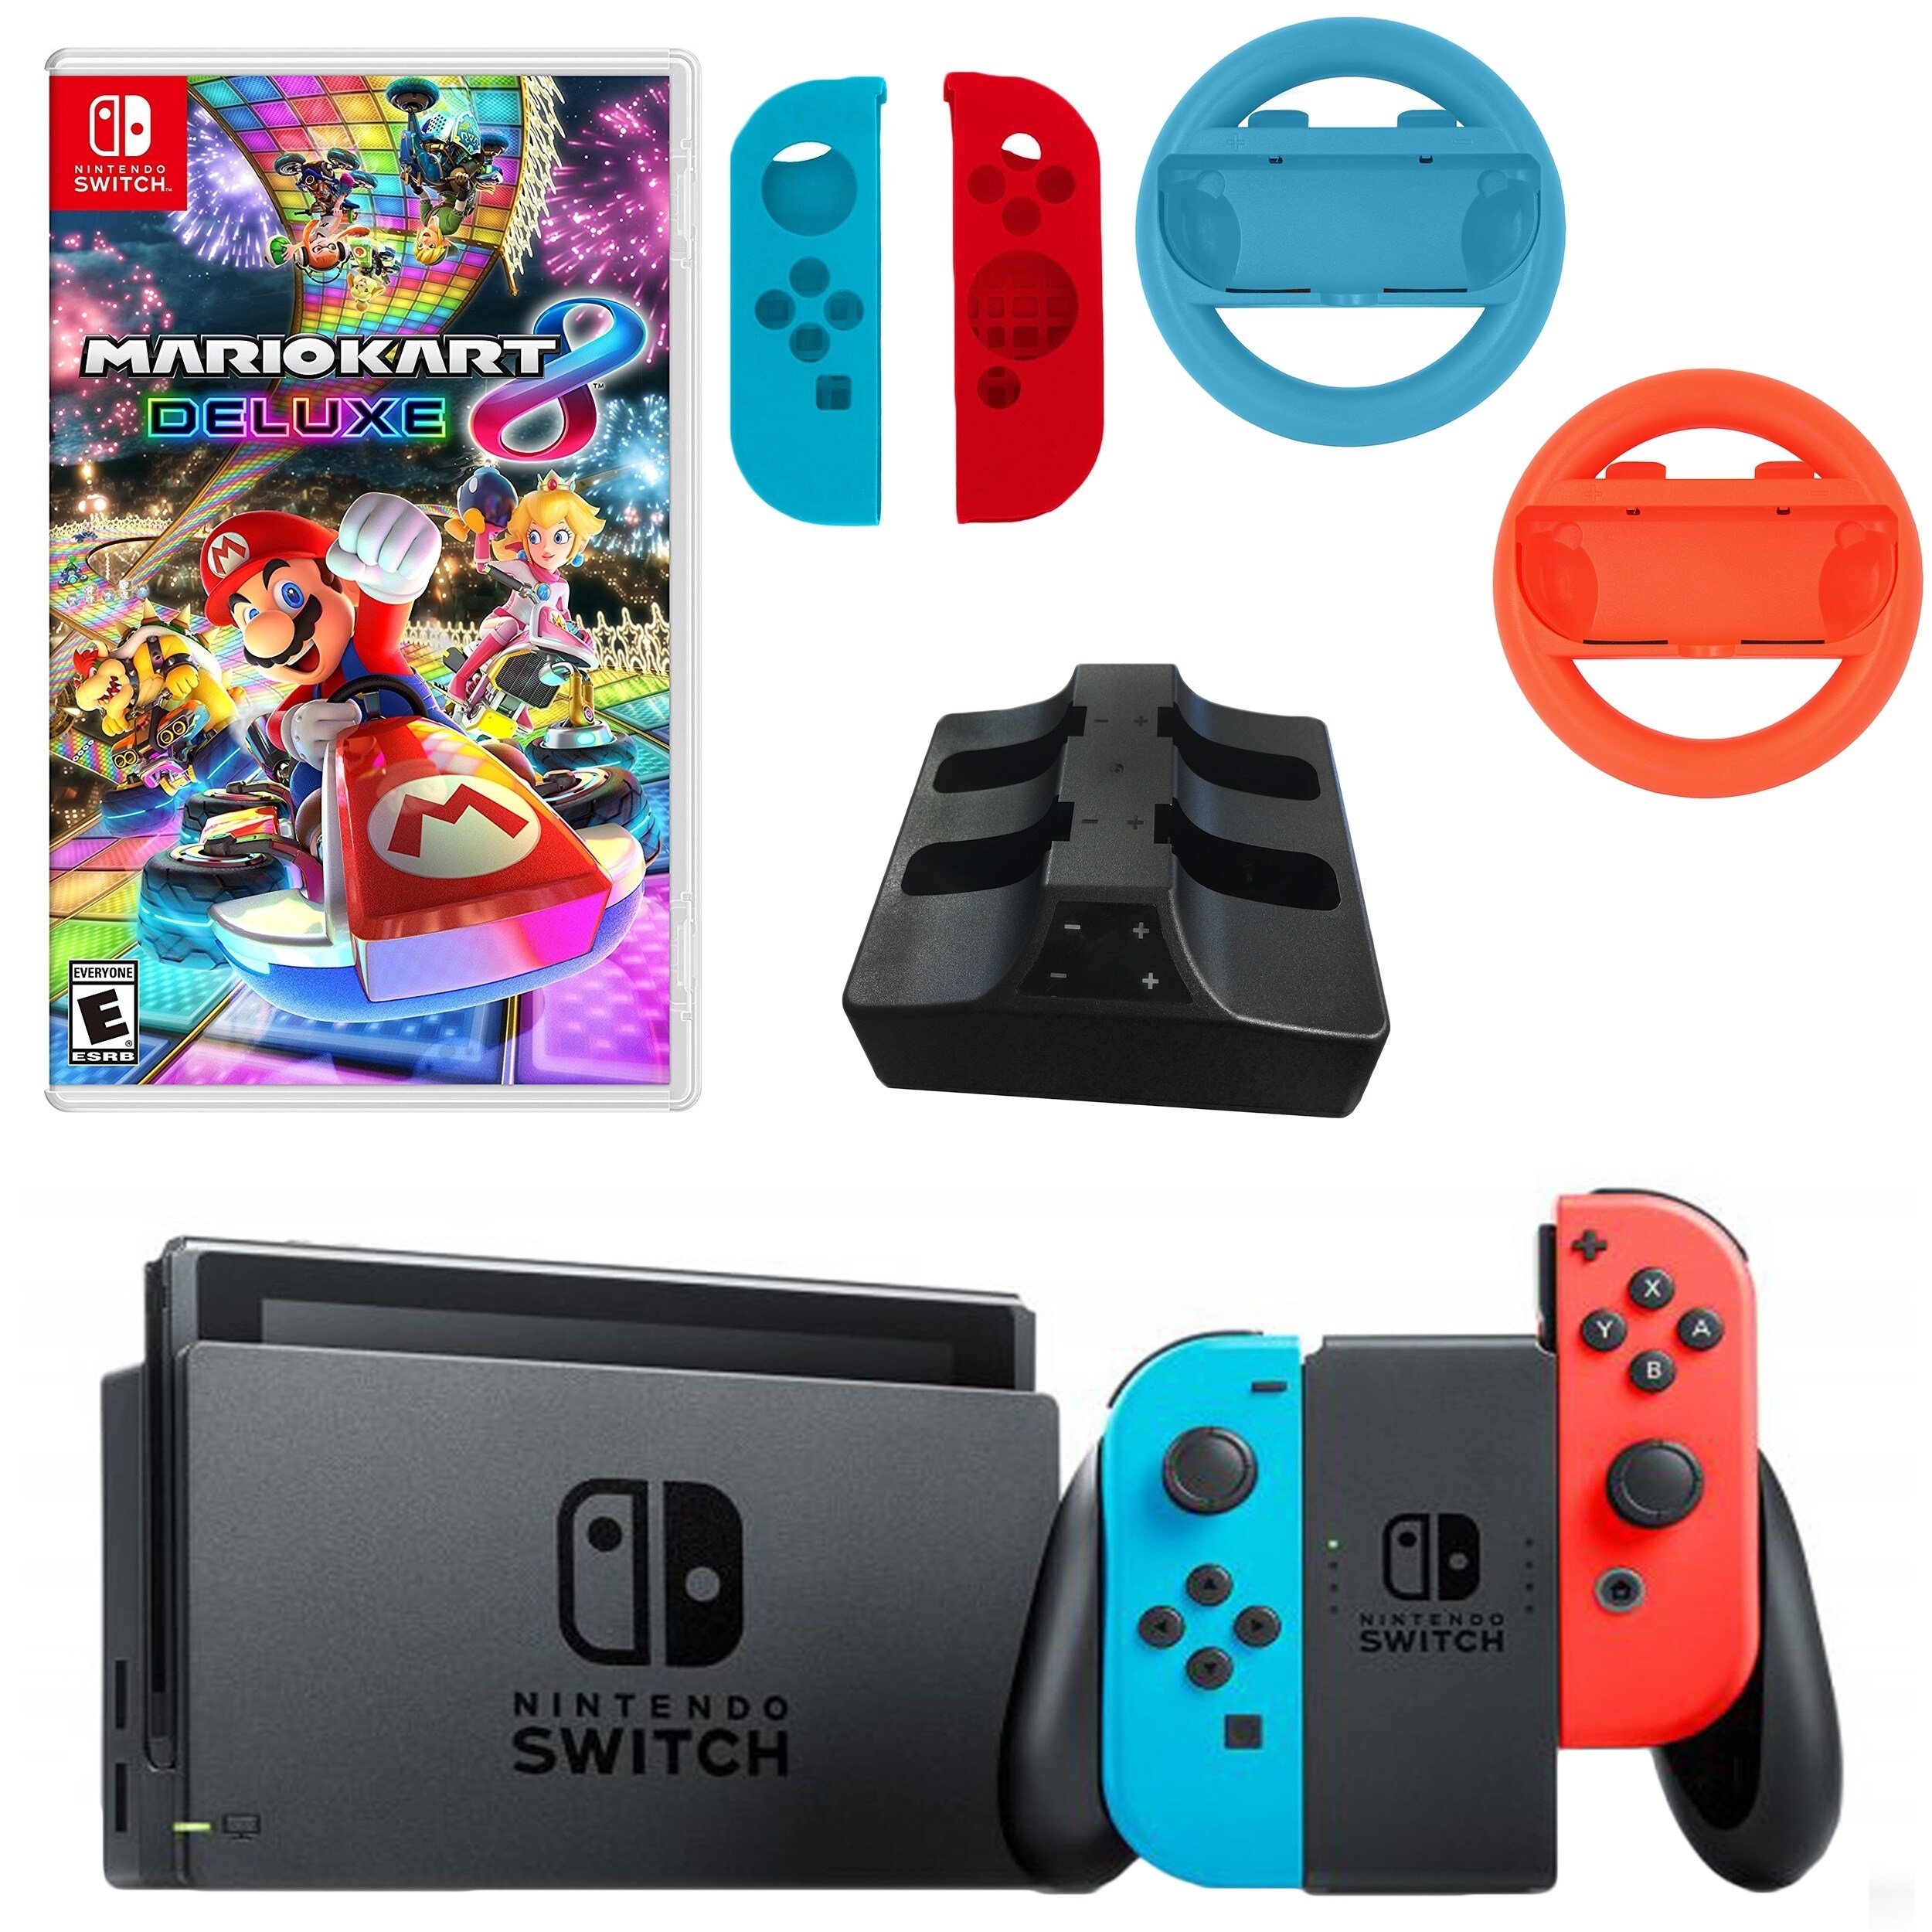 nintendo switch in neon with mario kart game and accessories